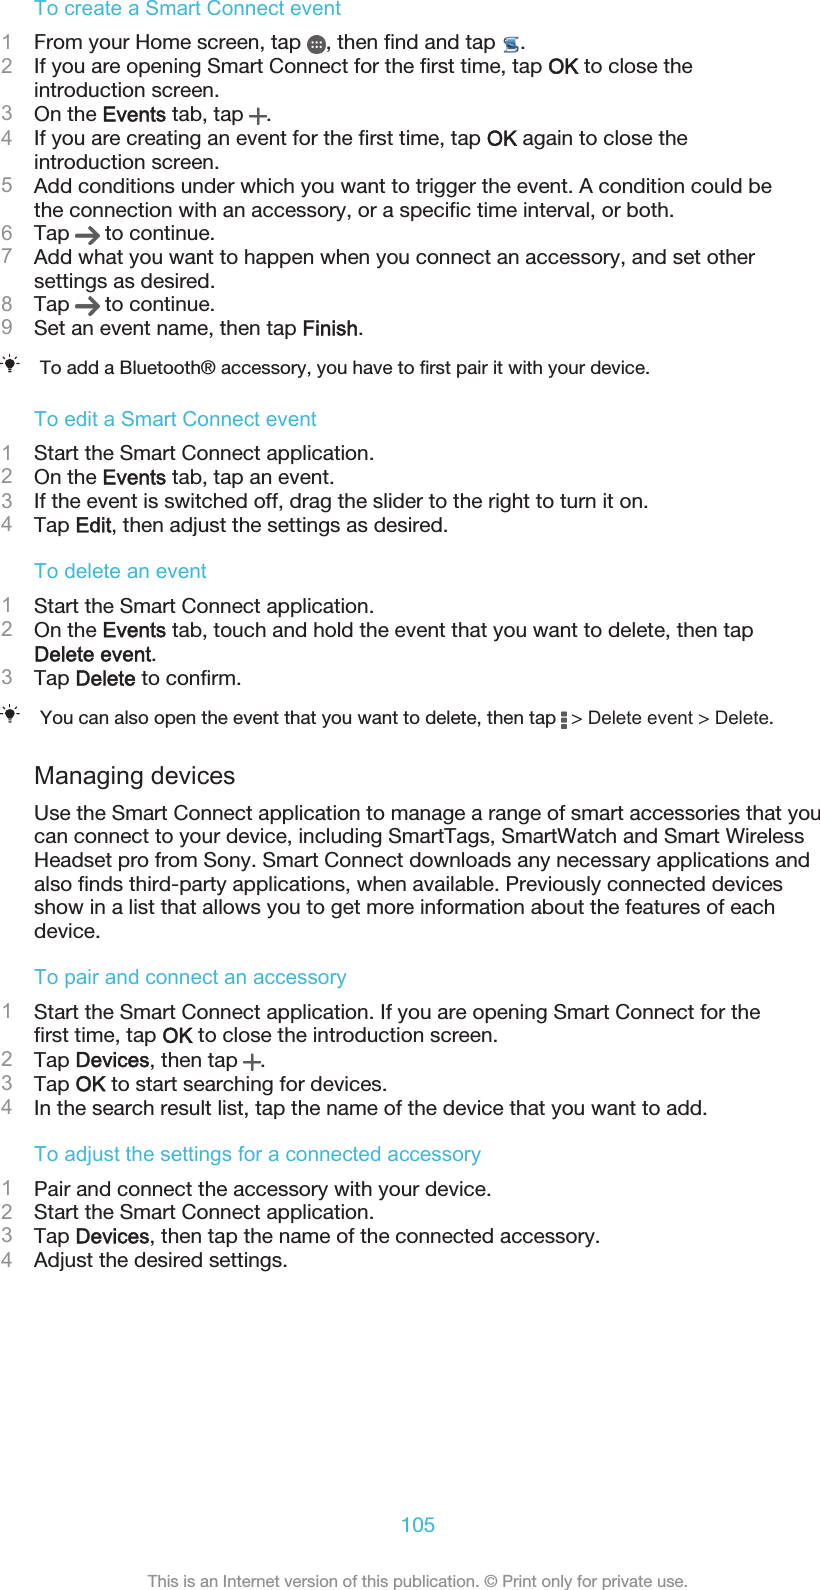 To create a Smart Connect event1From your Home screen, tap  , then find and tap  .2If you are opening Smart Connect for the first time, tap OK to close theintroduction screen.3On the Events tab, tap  .4If you are creating an event for the first time, tap OK again to close theintroduction screen.5Add conditions under which you want to trigger the event. A condition could bethe connection with an accessory, or a specific time interval, or both.6Tap   to continue.7Add what you want to happen when you connect an accessory, and set othersettings as desired.8Tap   to continue.9Set an event name, then tap Finish.To add a Bluetooth® accessory, you have to first pair it with your device.To edit a Smart Connect event1Start the Smart Connect application.2On the Events tab, tap an event.3If the event is switched off, drag the slider to the right to turn it on.4Tap Edit, then adjust the settings as desired.To delete an event1Start the Smart Connect application.2On the Events tab, touch and hold the event that you want to delete, then tapDelete event.3Tap Delete to confirm.You can also open the event that you want to delete, then tap   &gt; Delete event &gt; Delete.Managing devicesUse the Smart Connect application to manage a range of smart accessories that youcan connect to your device, including SmartTags, SmartWatch and Smart WirelessHeadset pro from Sony. Smart Connect downloads any necessary applications andalso finds third-party applications, when available. Previously connected devicesshow in a list that allows you to get more information about the features of eachdevice.To pair and connect an accessory1Start the Smart Connect application. If you are opening Smart Connect for thefirst time, tap OK to close the introduction screen.2Tap Devices, then tap  .3Tap OK to start searching for devices.4In the search result list, tap the name of the device that you want to add.To adjust the settings for a connected accessory1Pair and connect the accessory with your device.2Start the Smart Connect application.3Tap Devices, then tap the name of the connected accessory.4Adjust the desired settings.105This is an Internet version of this publication. © Print only for private use.